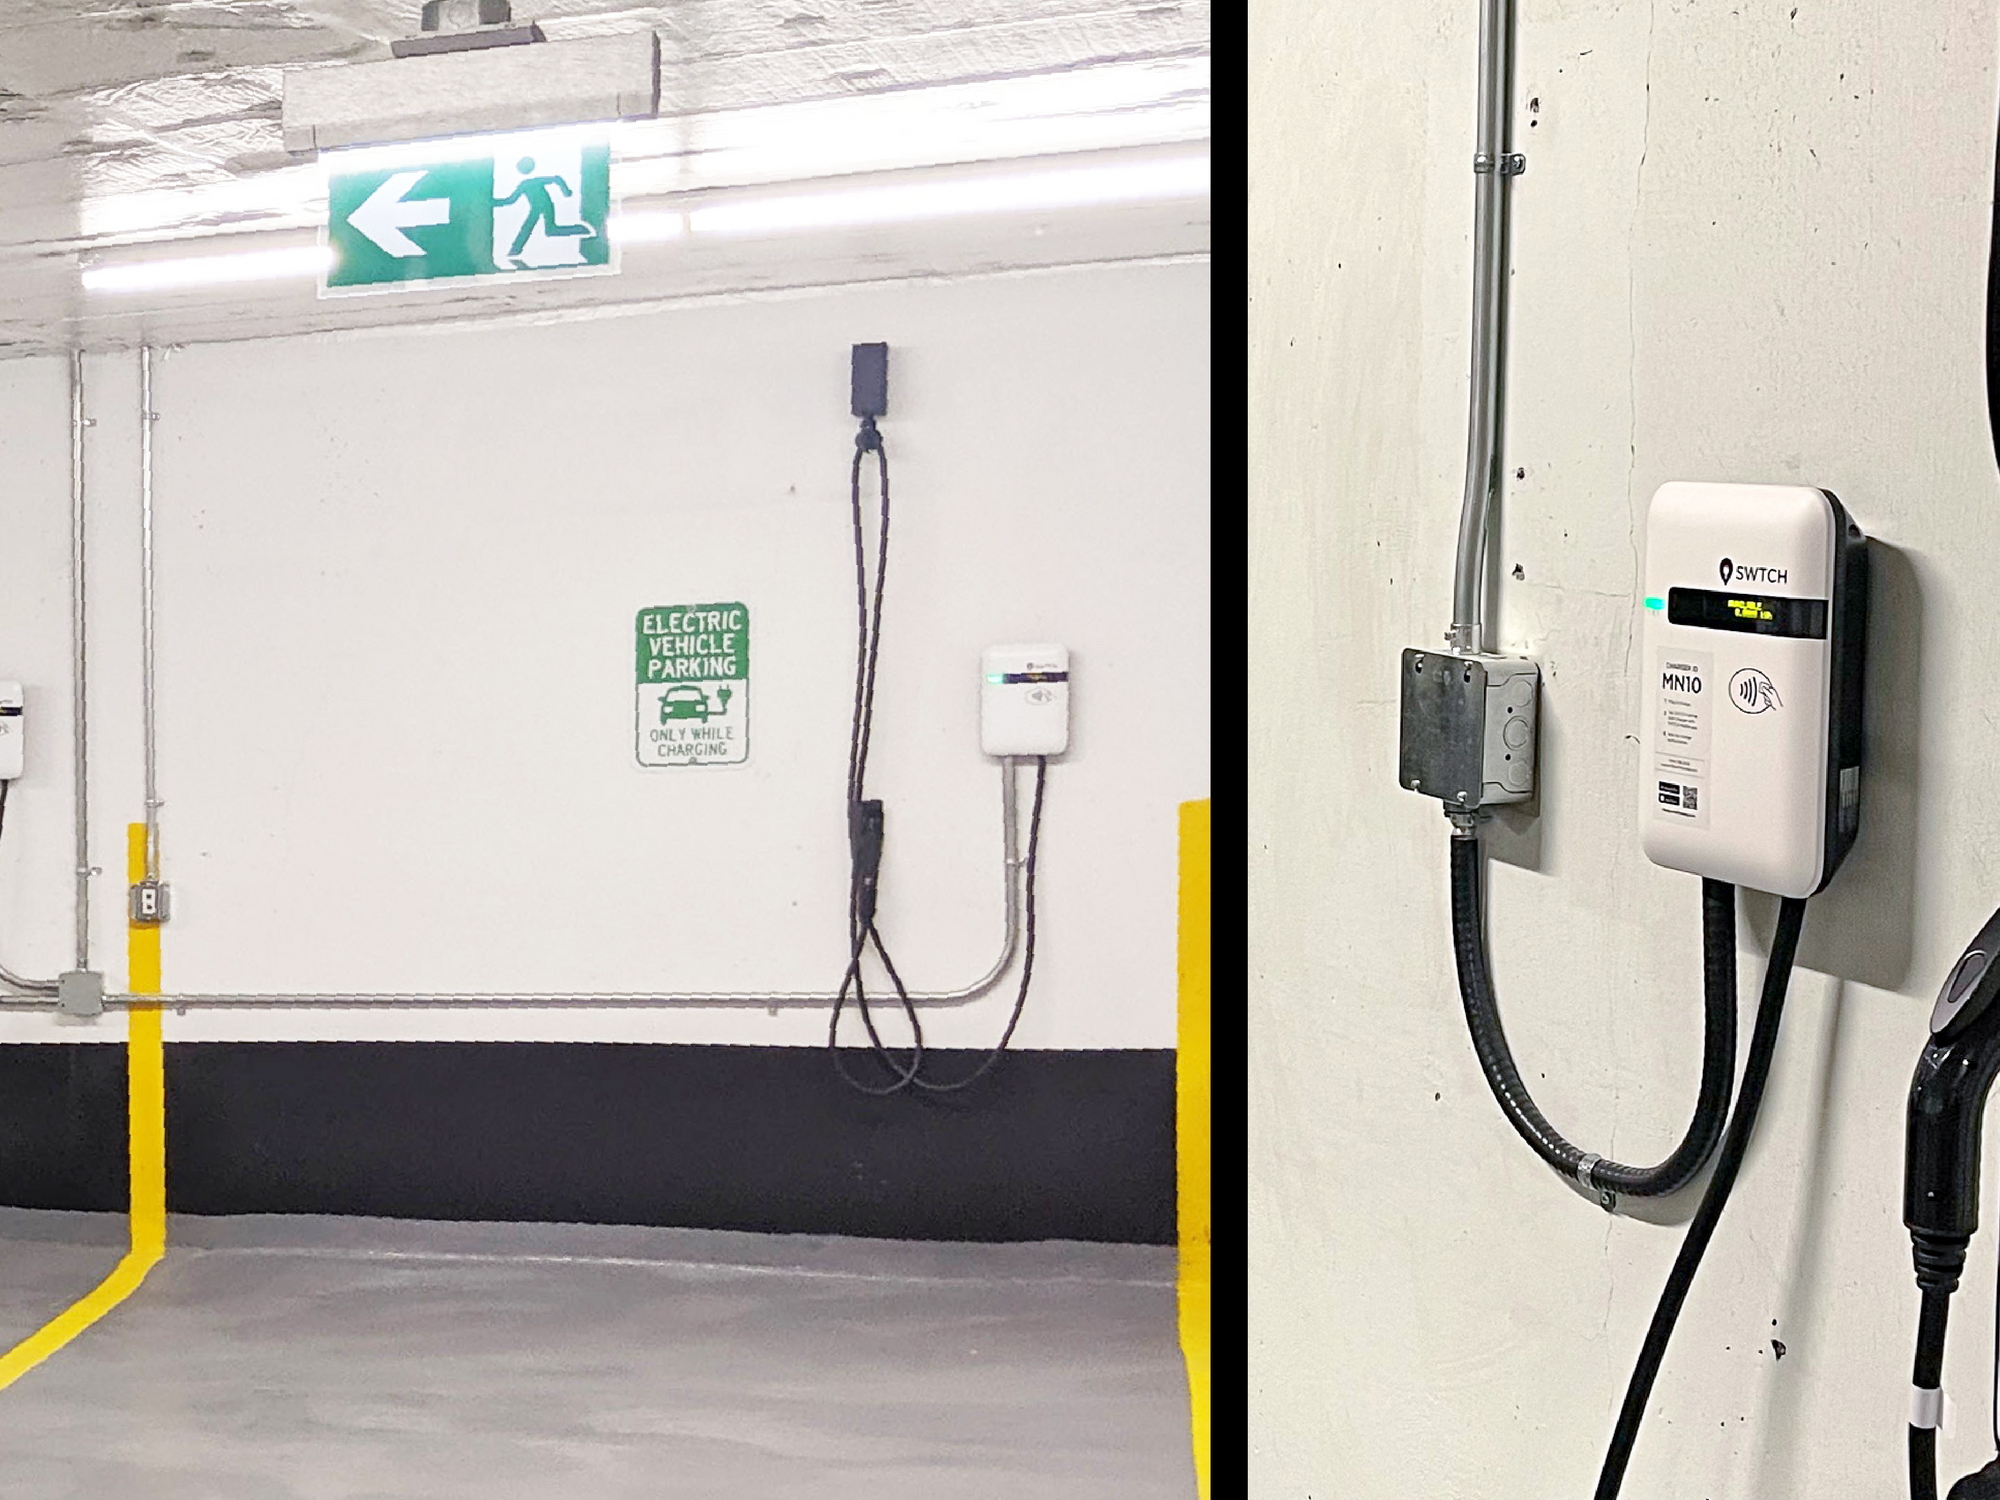 How SWTCH Energy Plans to Take On LA EV Charging